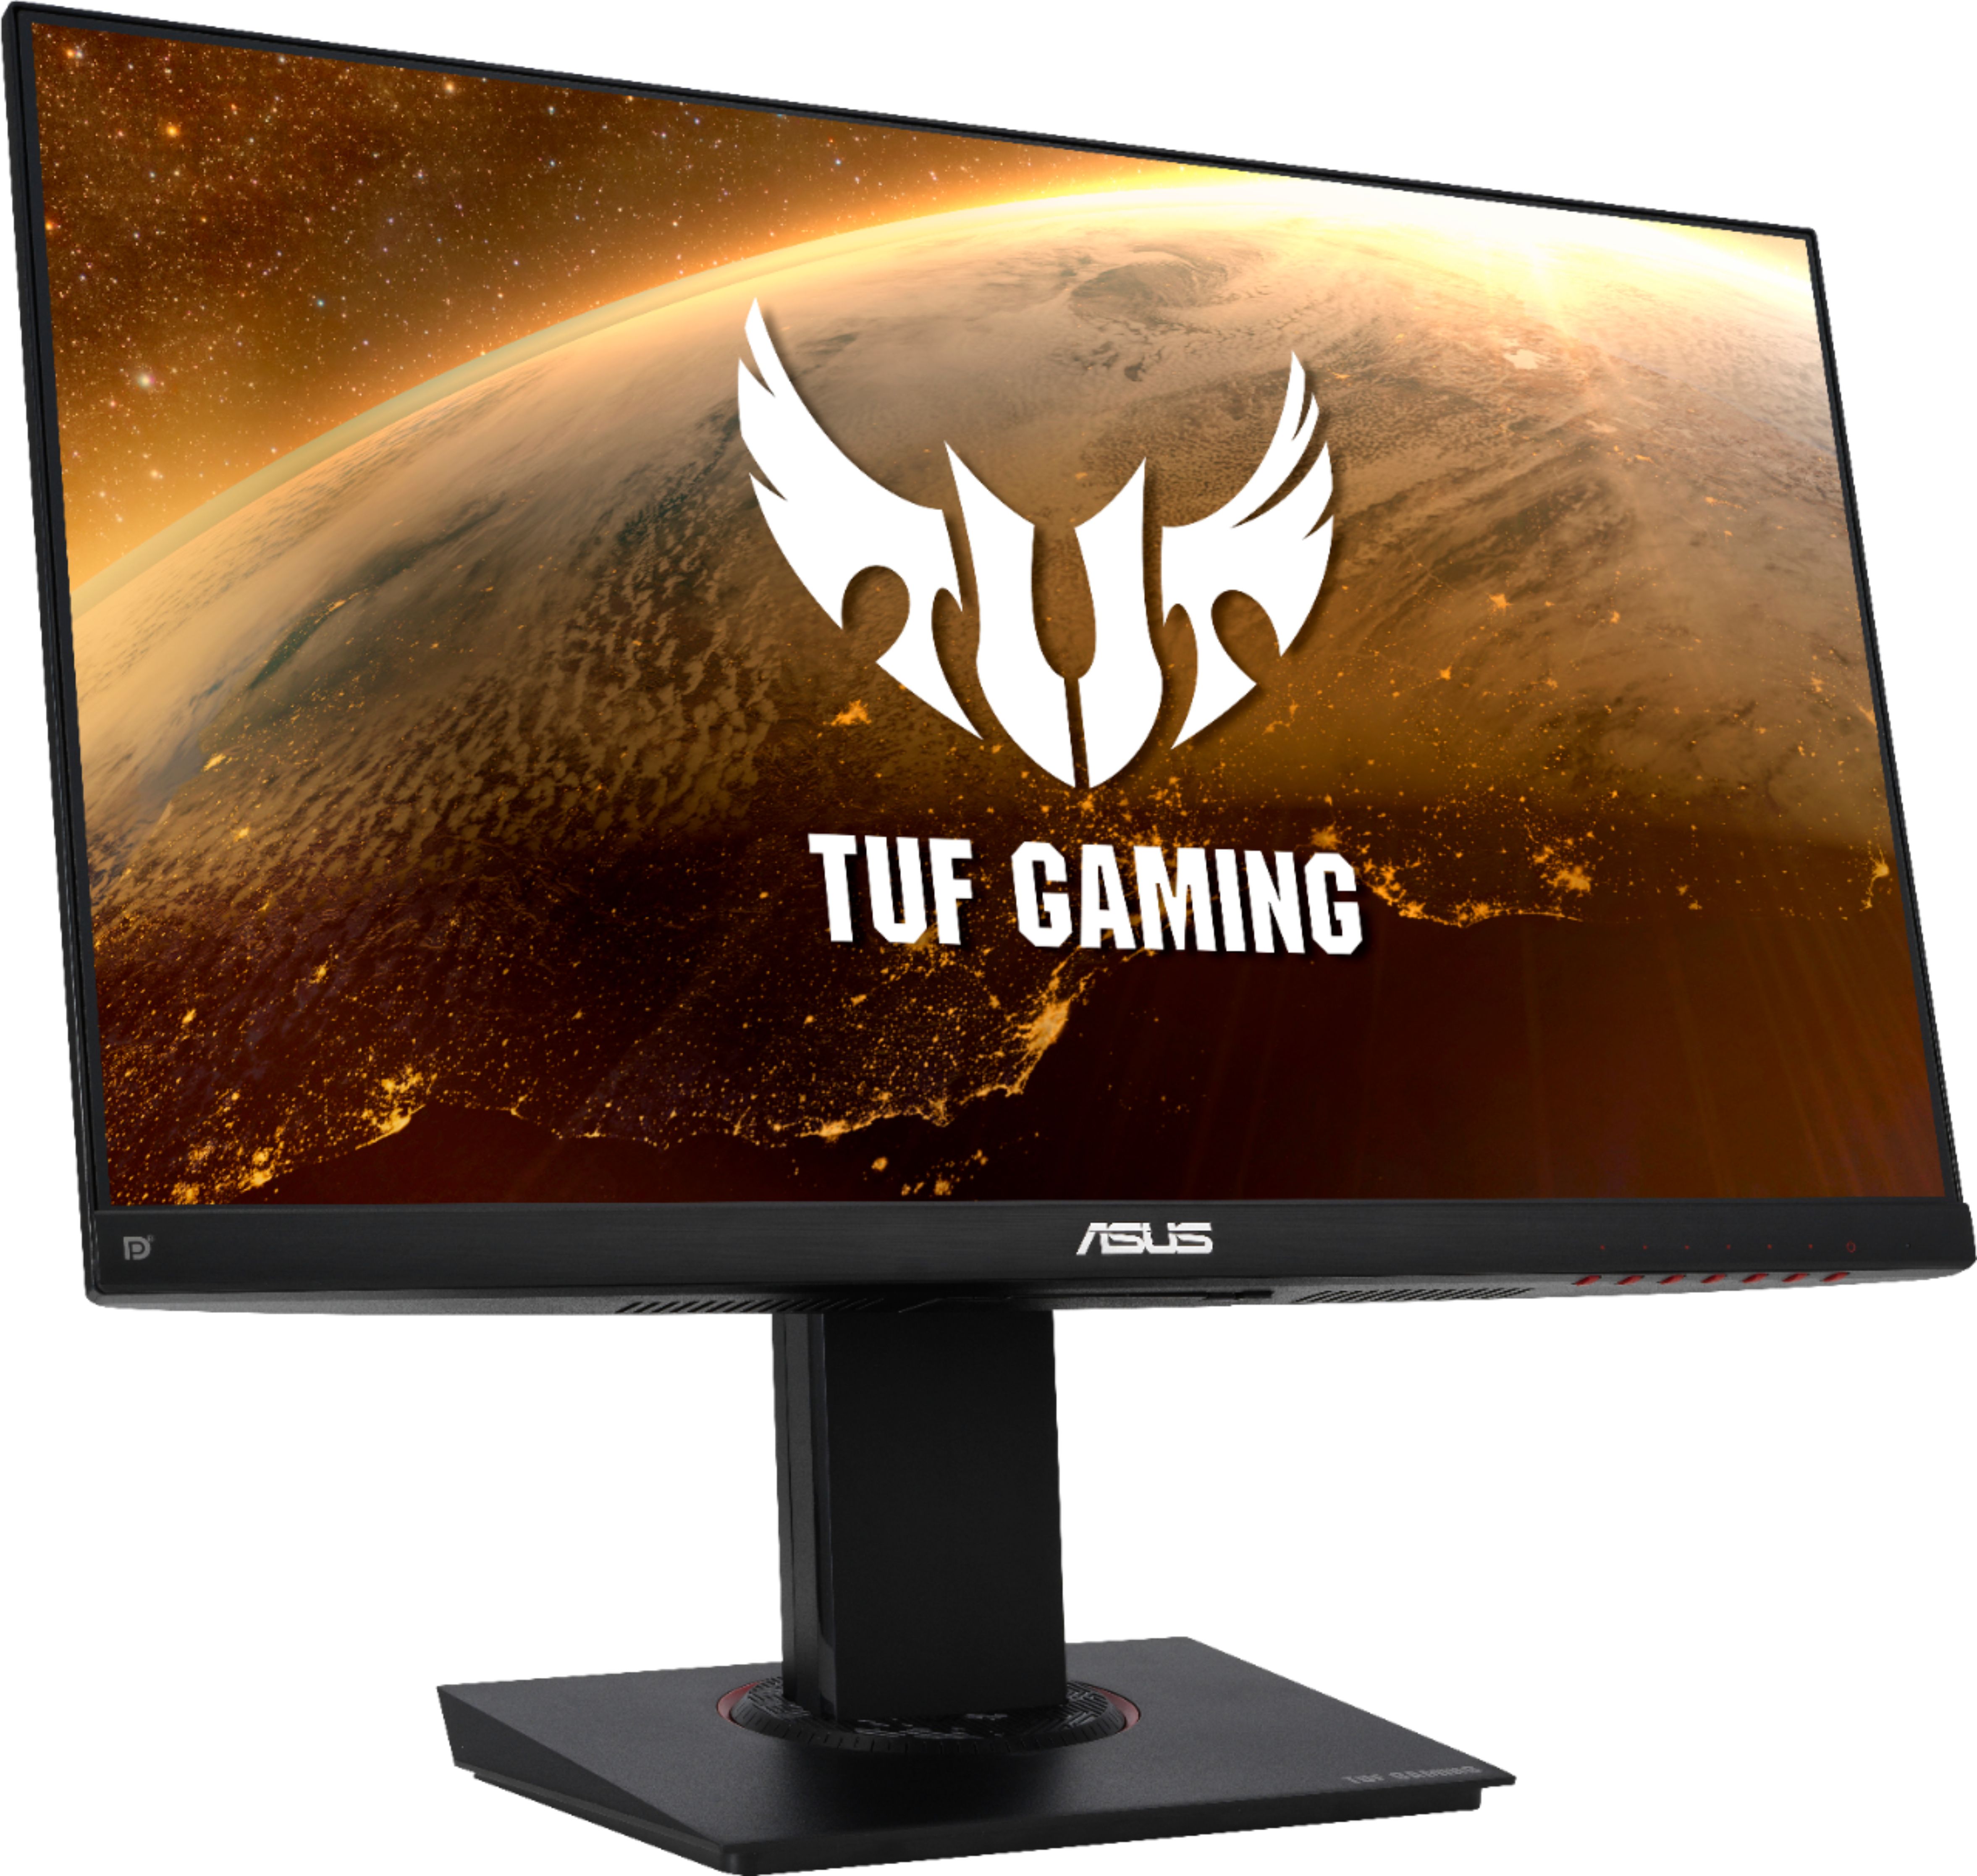 Angle View: ASUS - TUF 23.8” IPS FHD 144Hz 1ms FreeSync Gaming Monitor with Height Adjustable (DisplayPort, HDMI) - Black